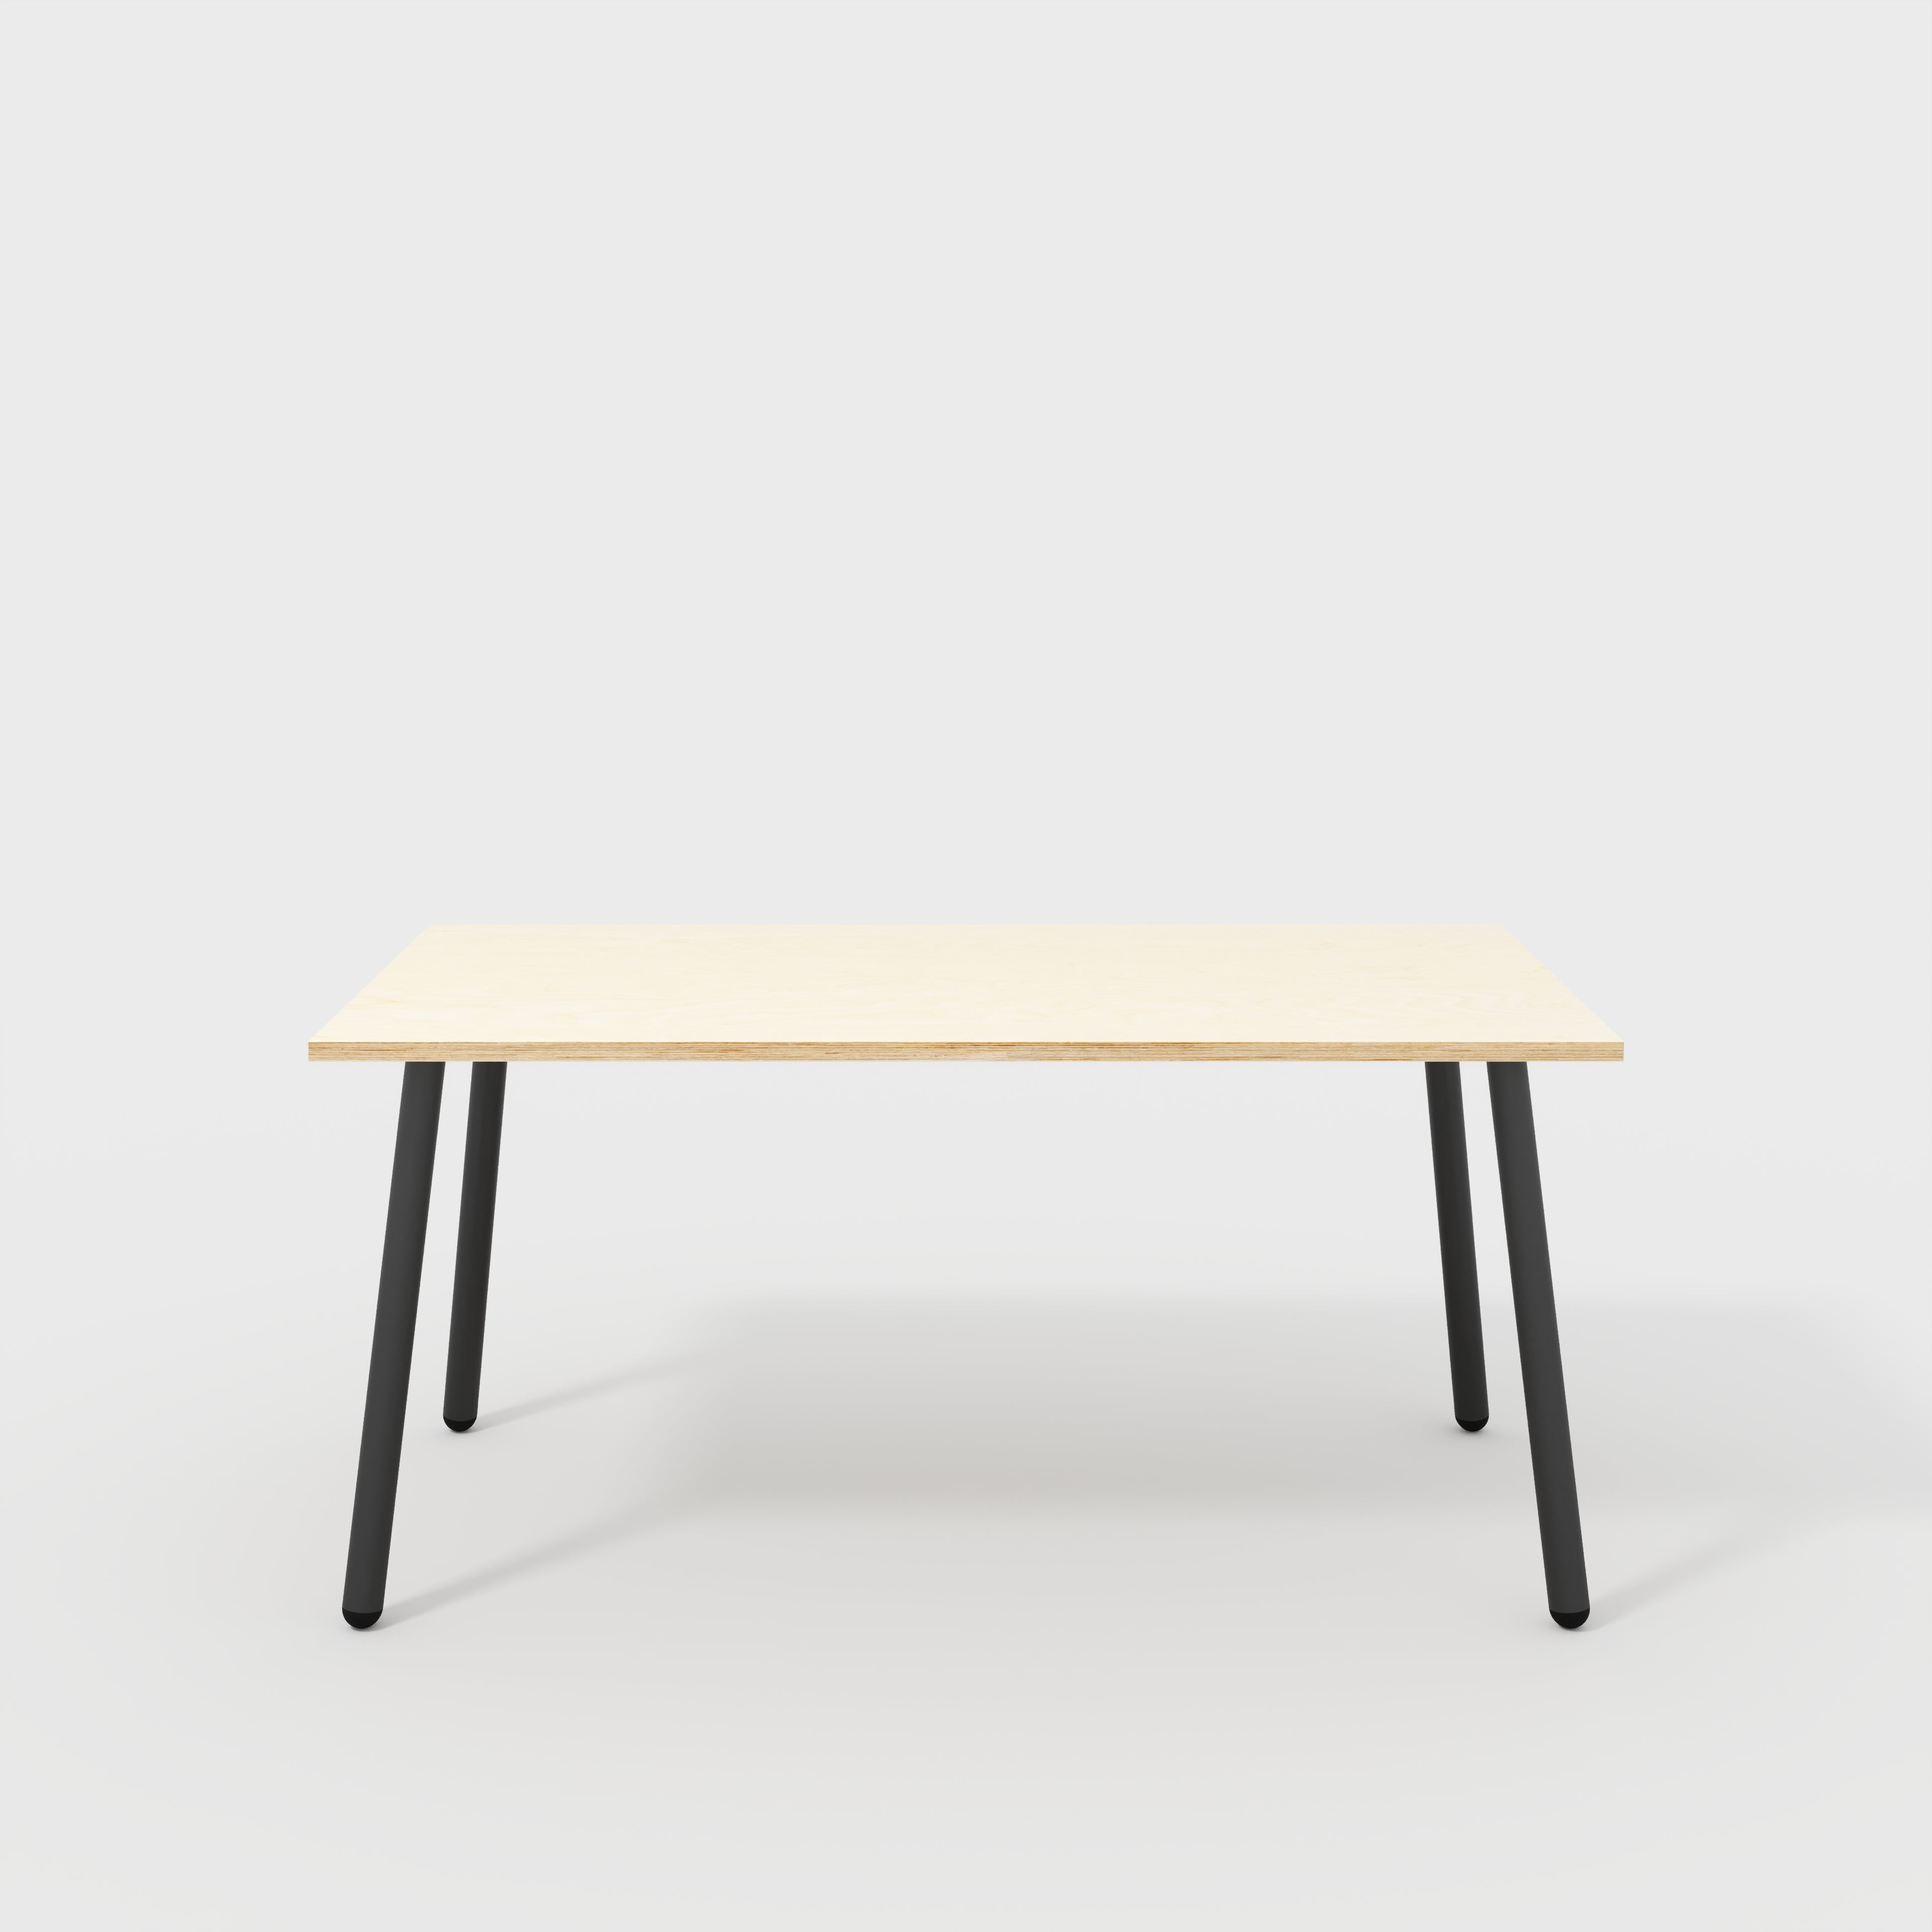 Table with Black Round Single Pin Legs - Plywood Birch - 1600(w) x 800(d) x 735(h)